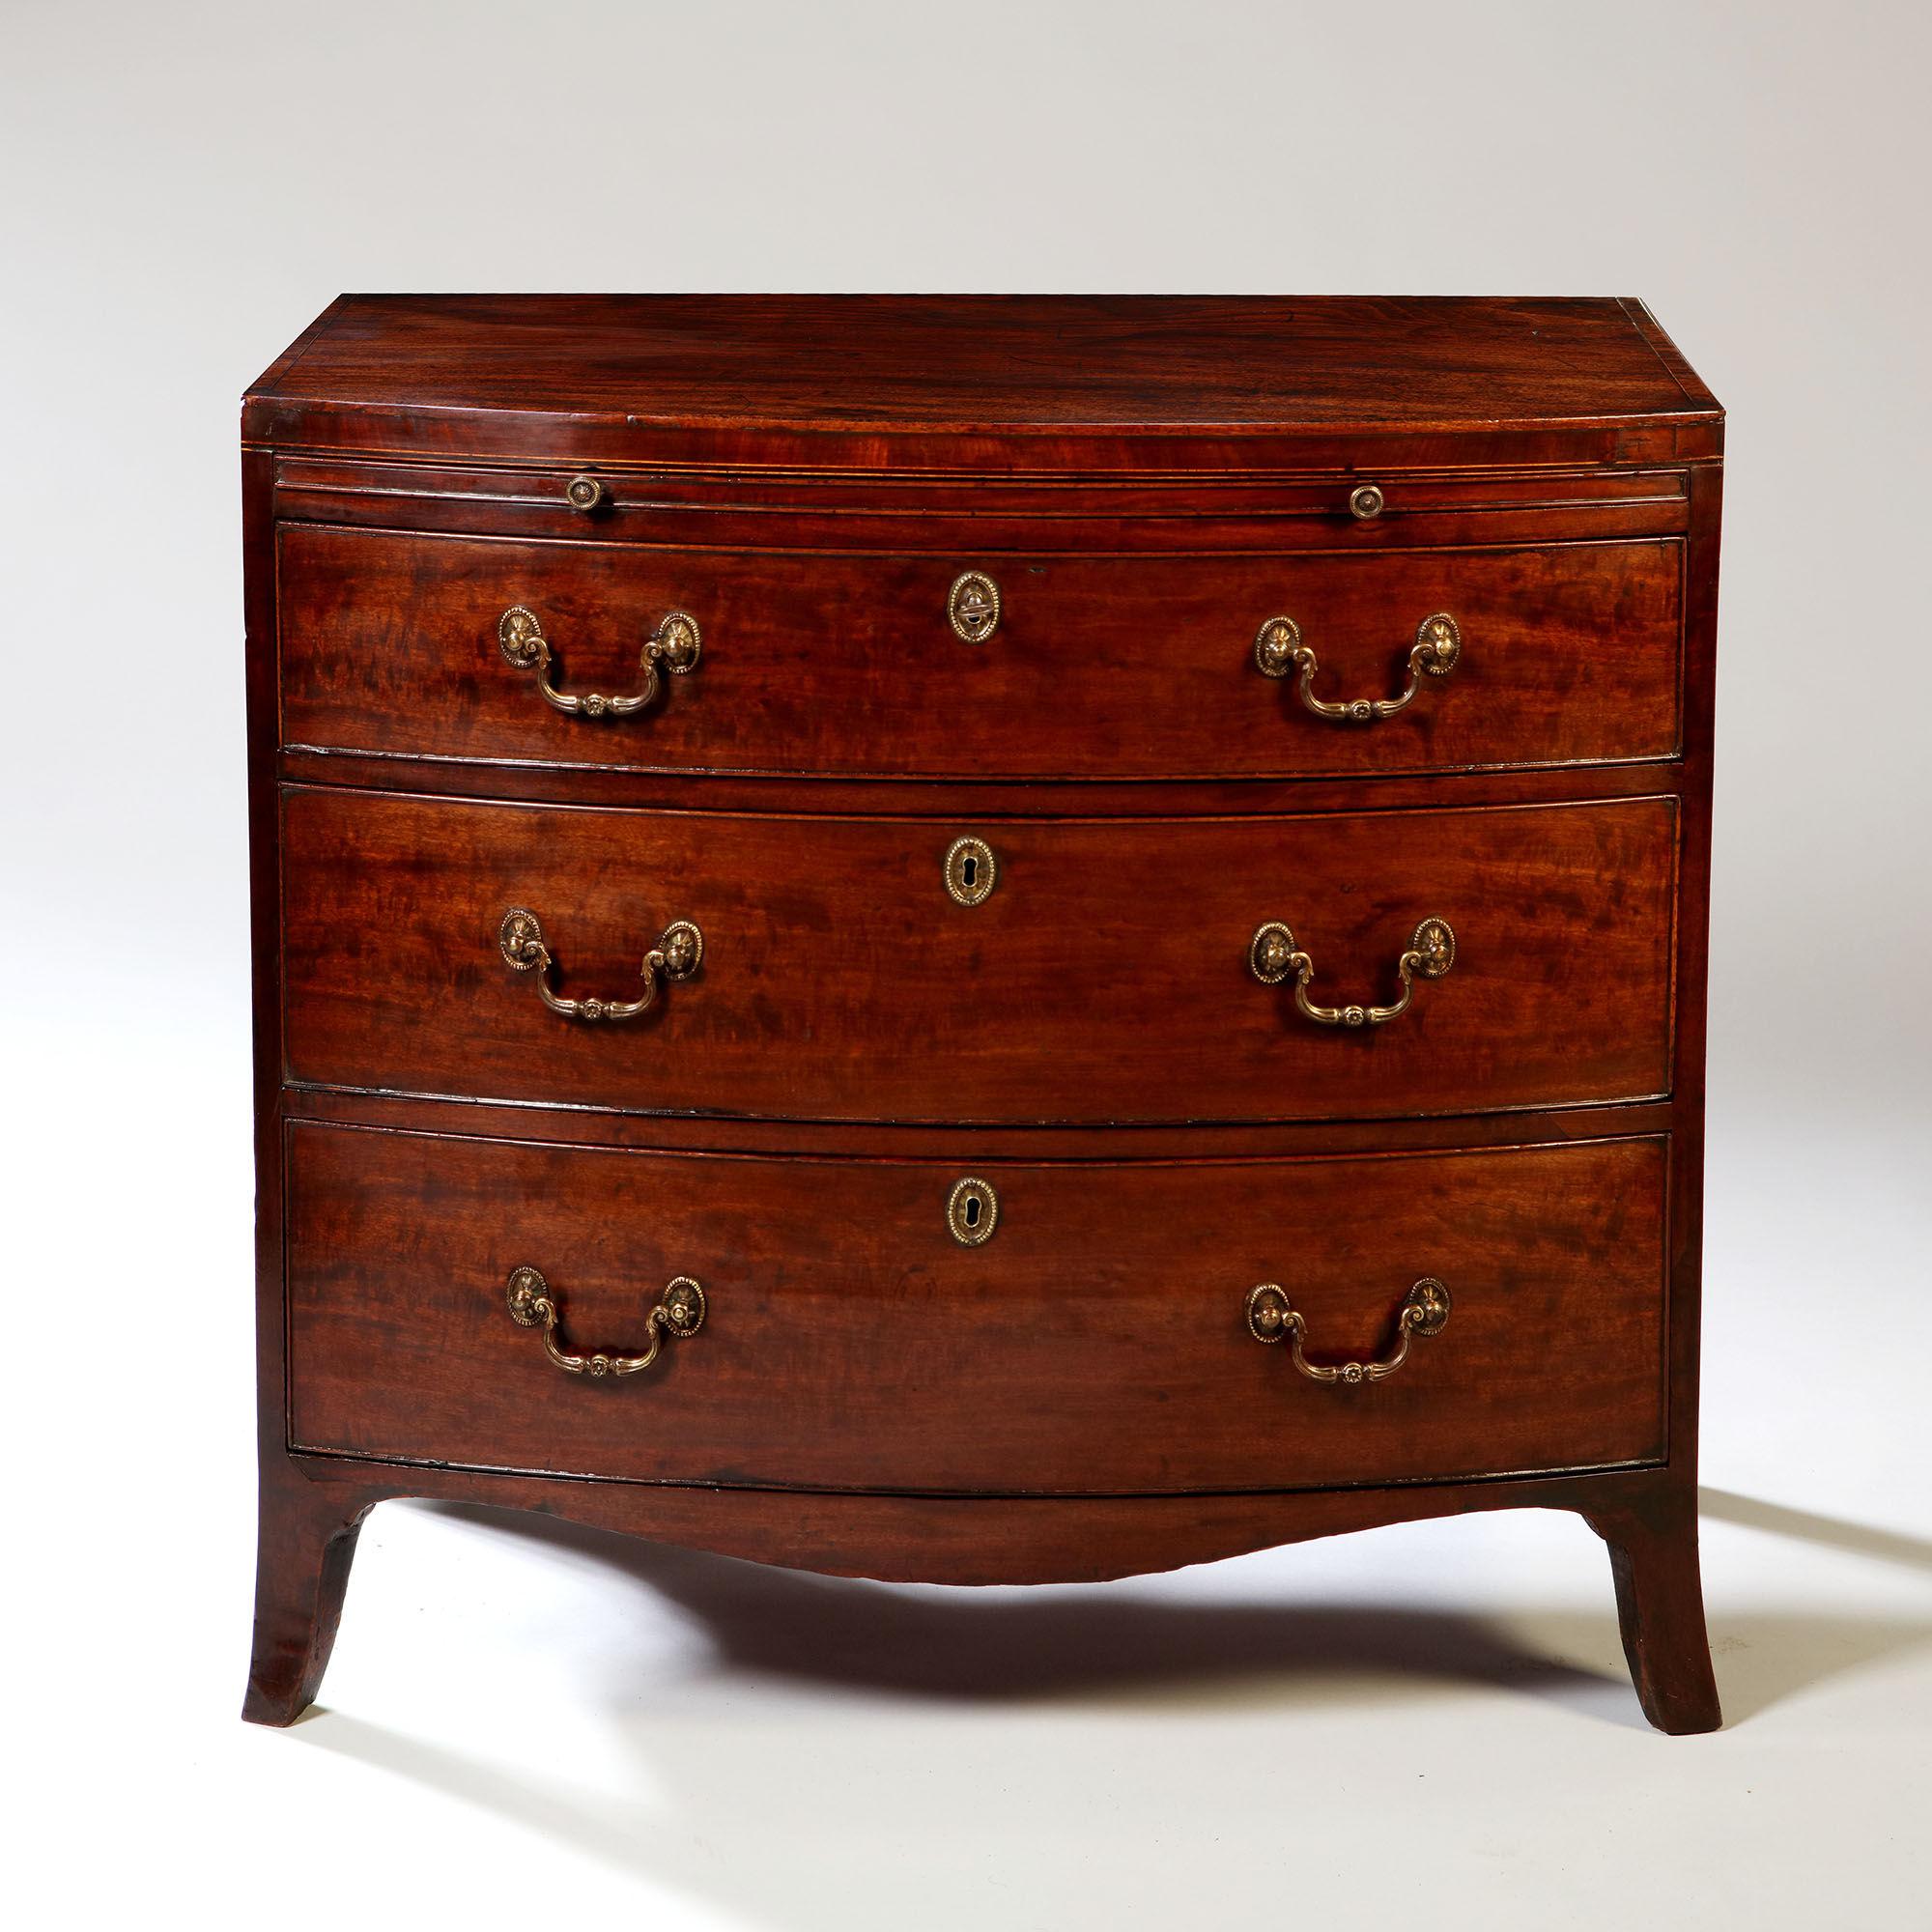 English George III Sheraton Period Bow-Fronted Caddy Topped Mahogany Chest of Drawers